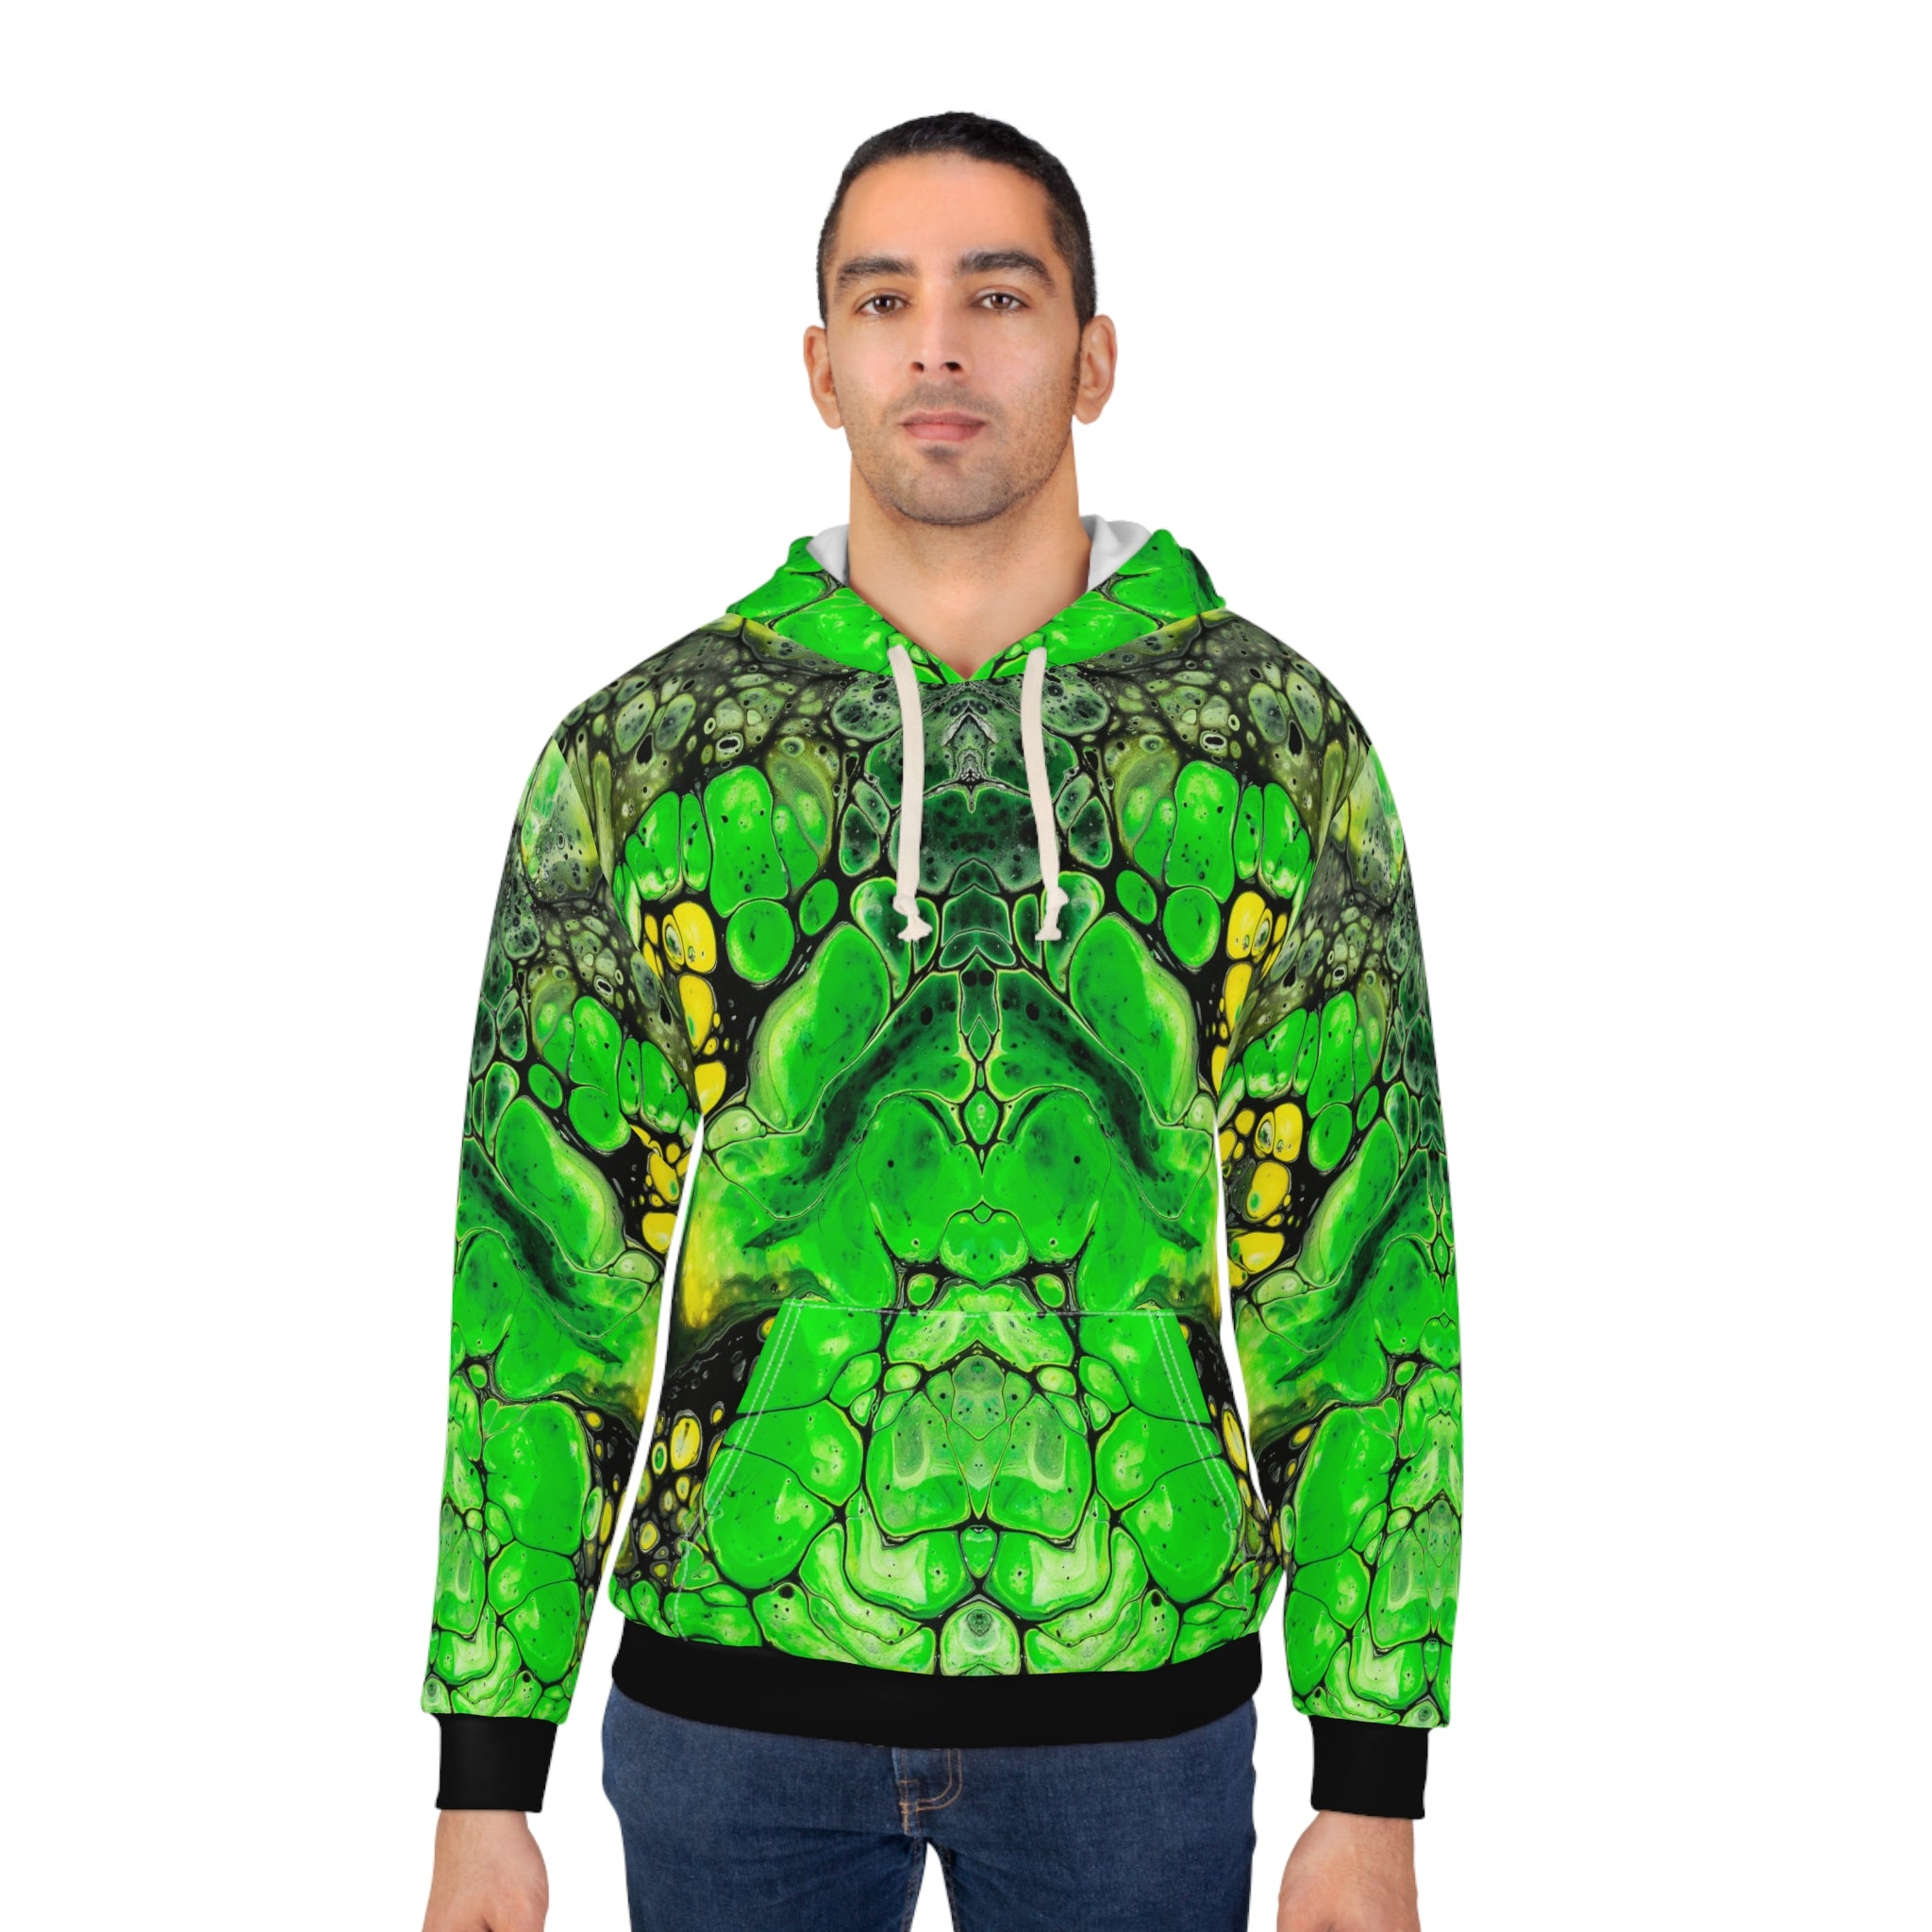 Cameron Creations - Green Galaxy - Pullover Hoodie - Male